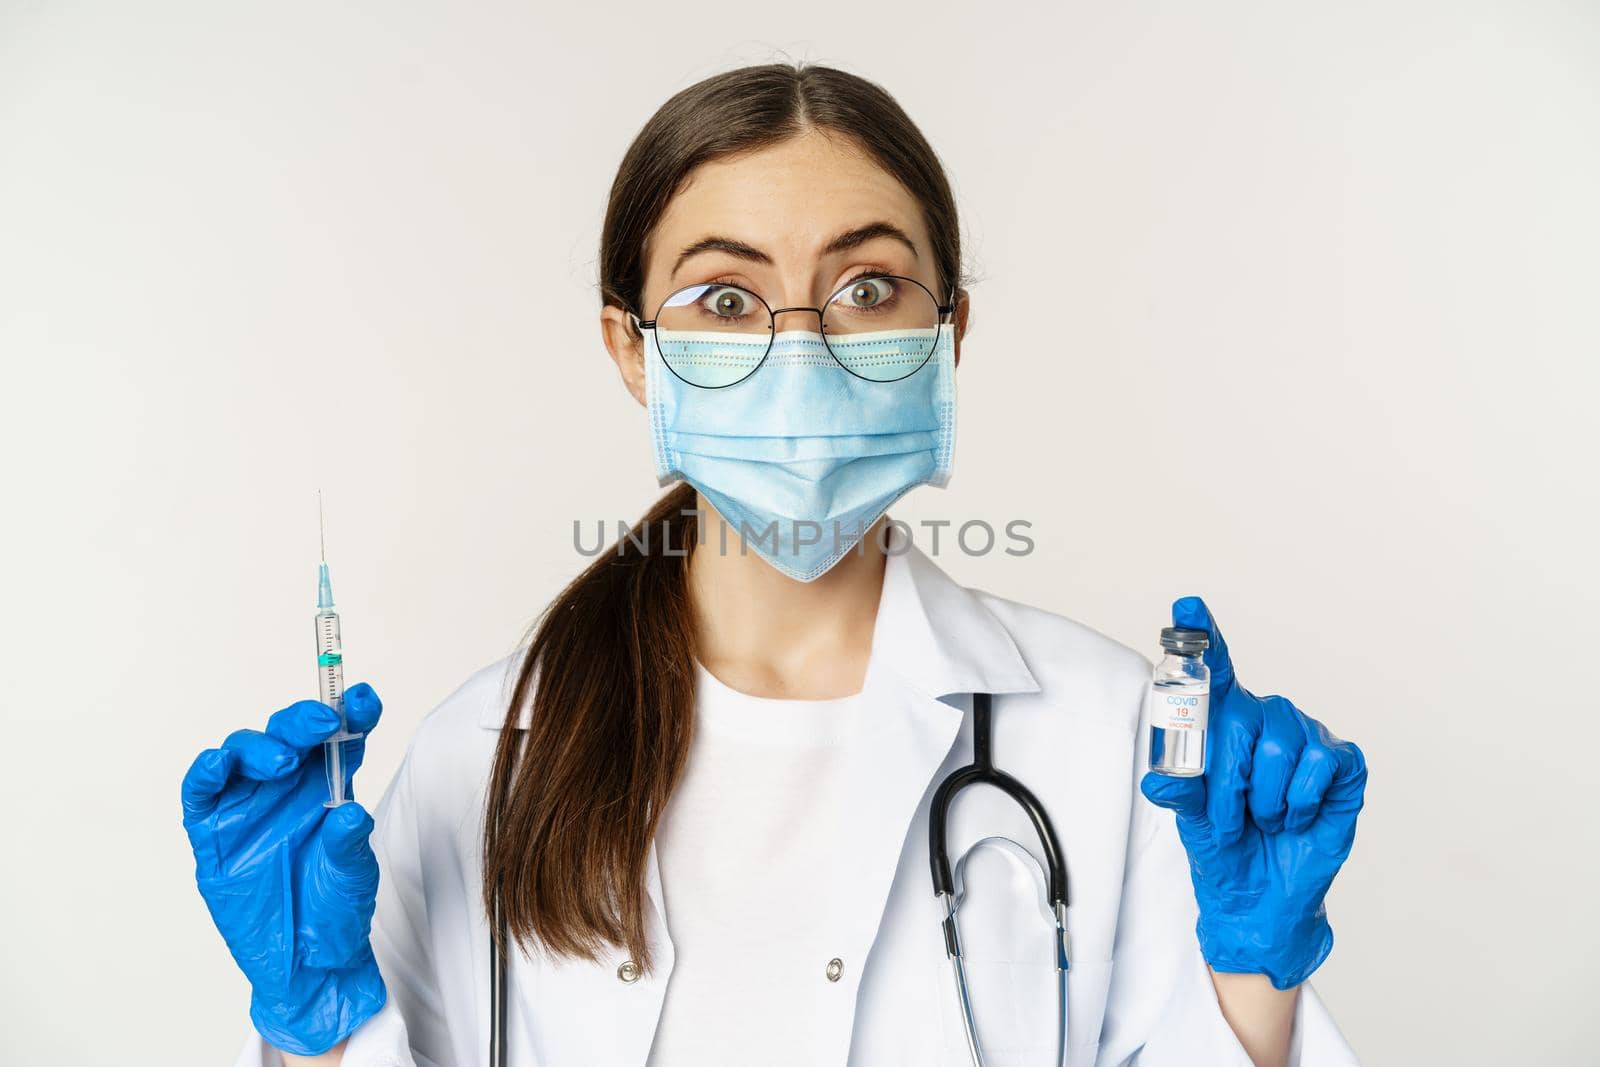 Covid-19 vaccination and healthcare concept. Young doctor in medical mask showing syringe and vaccine from coronavirus omicron variant, standing over white background.